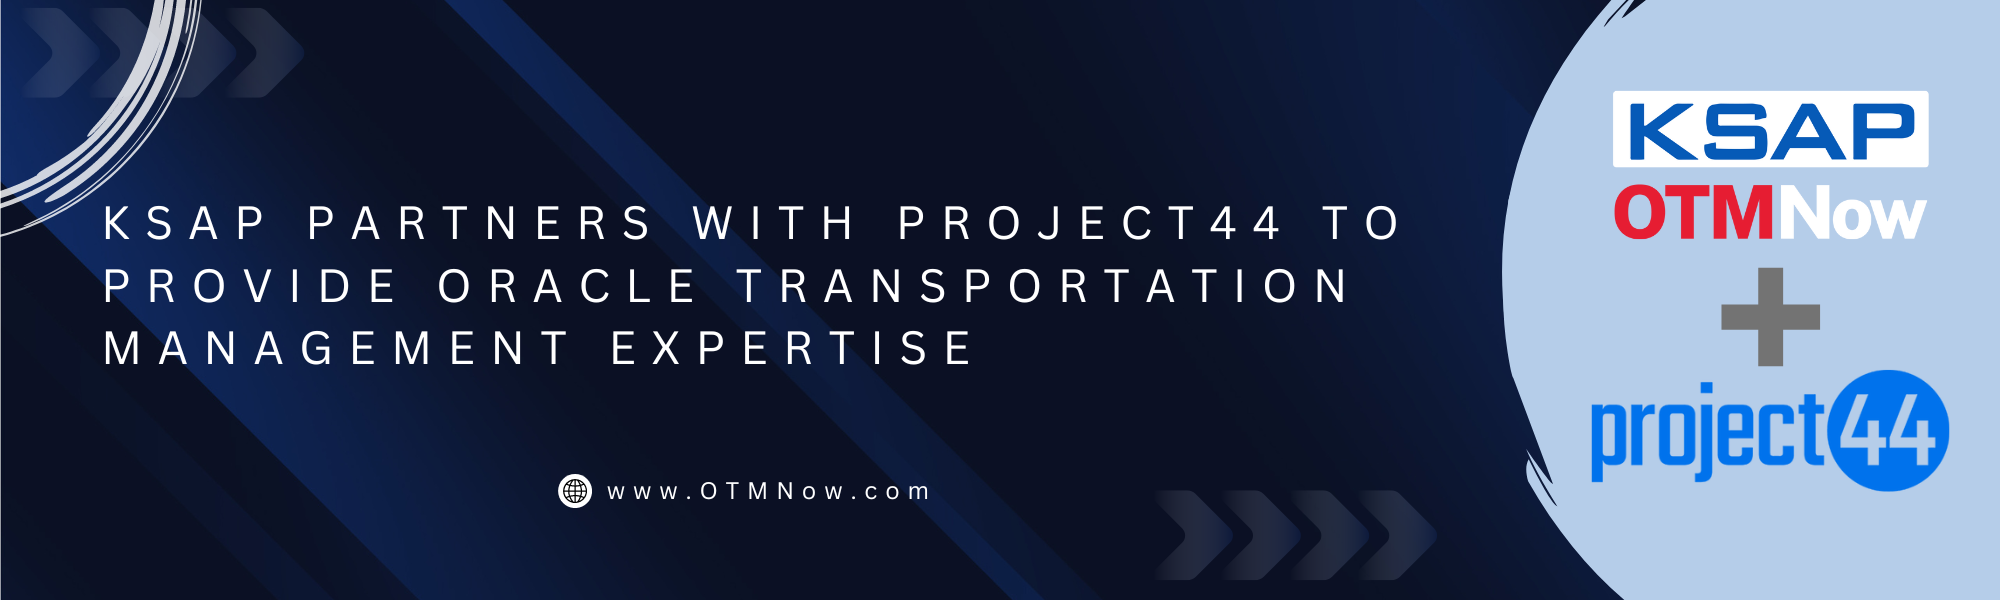 KSAP is the certified partner for project44